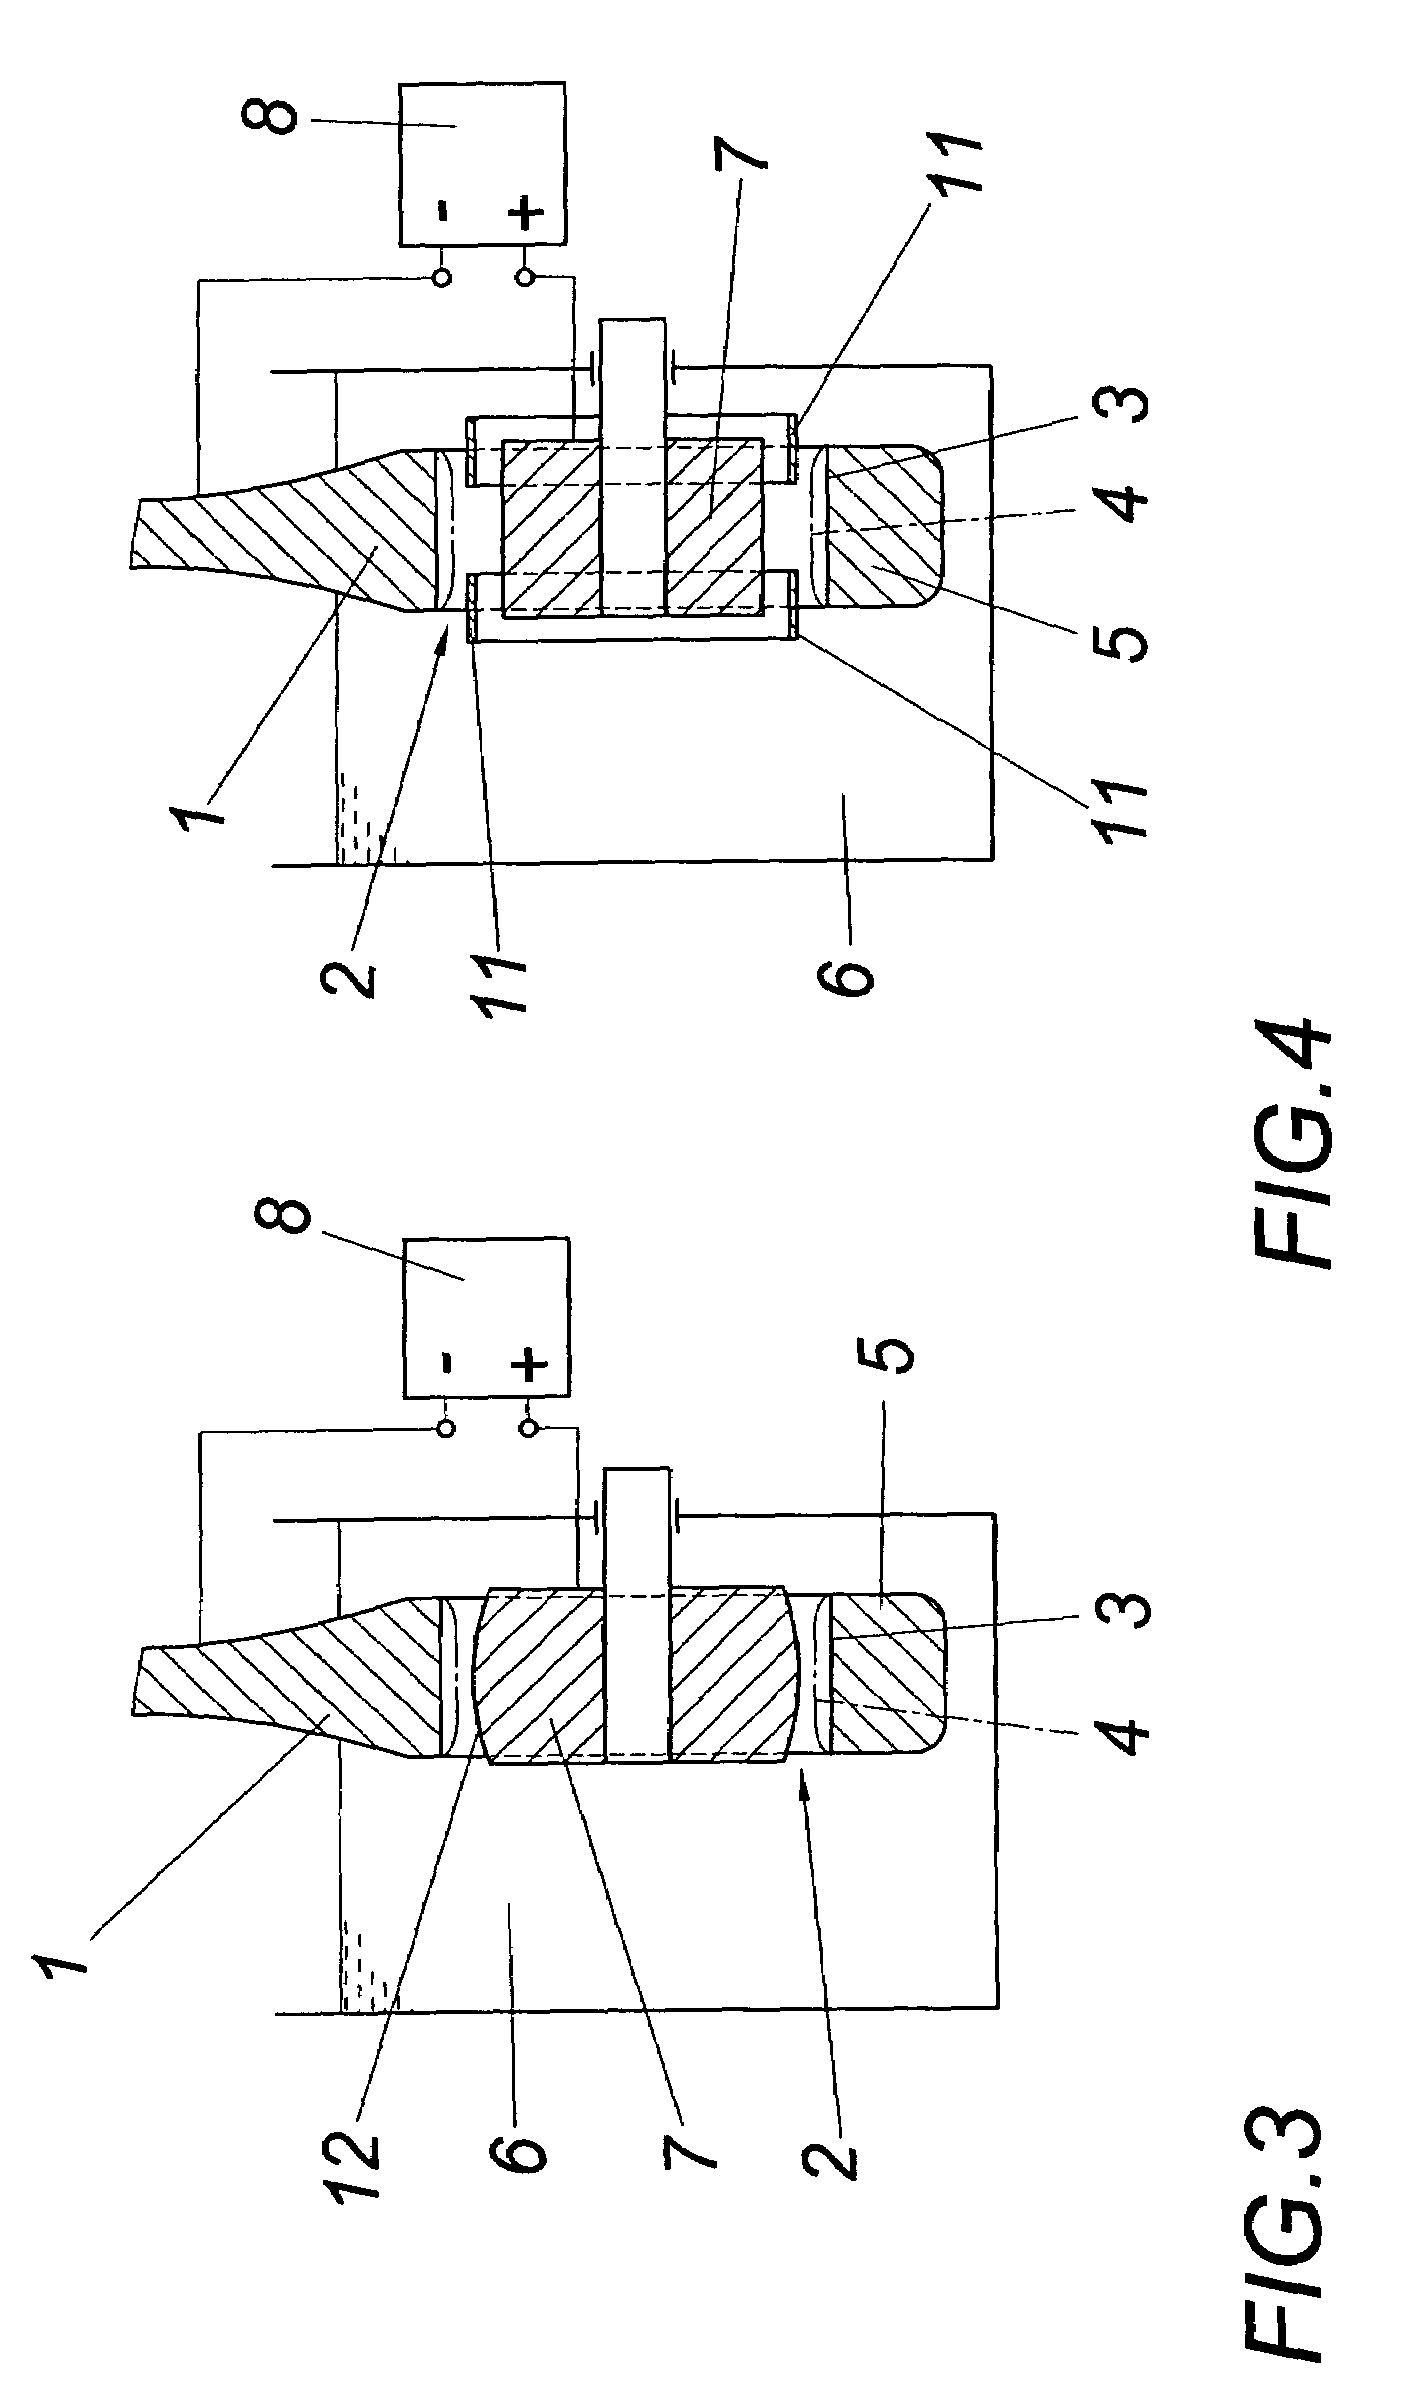 Method of producing a workpiece having at least one bearing eye